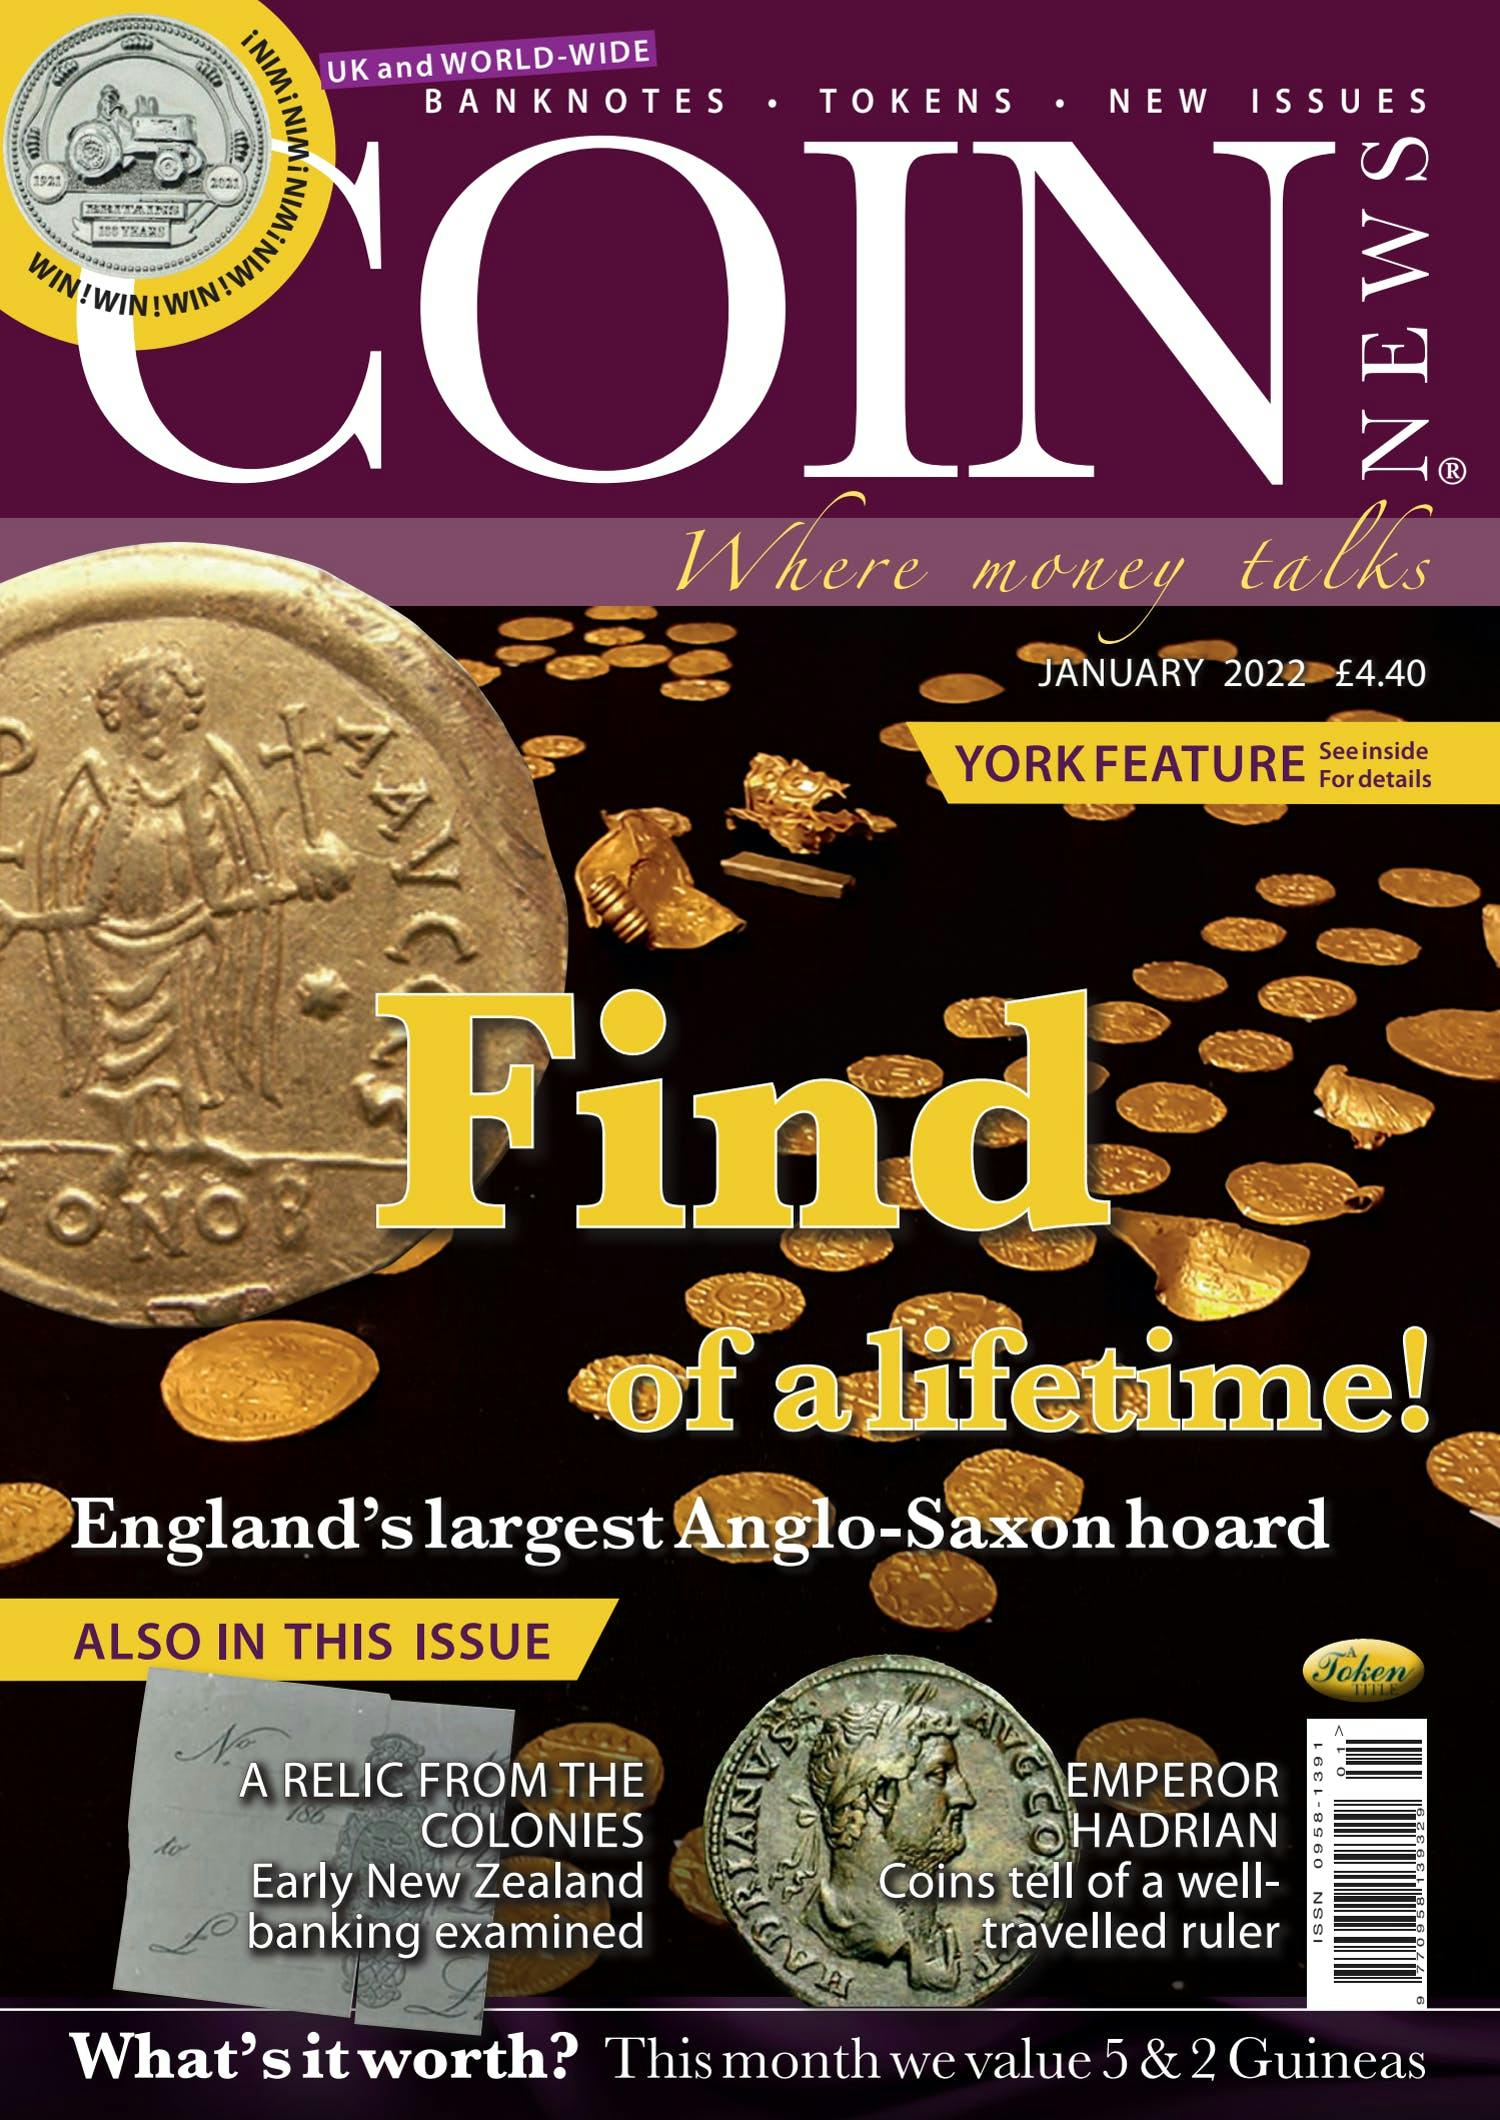 The front cover of Coin News, Volume 60, Number 1, January 2022